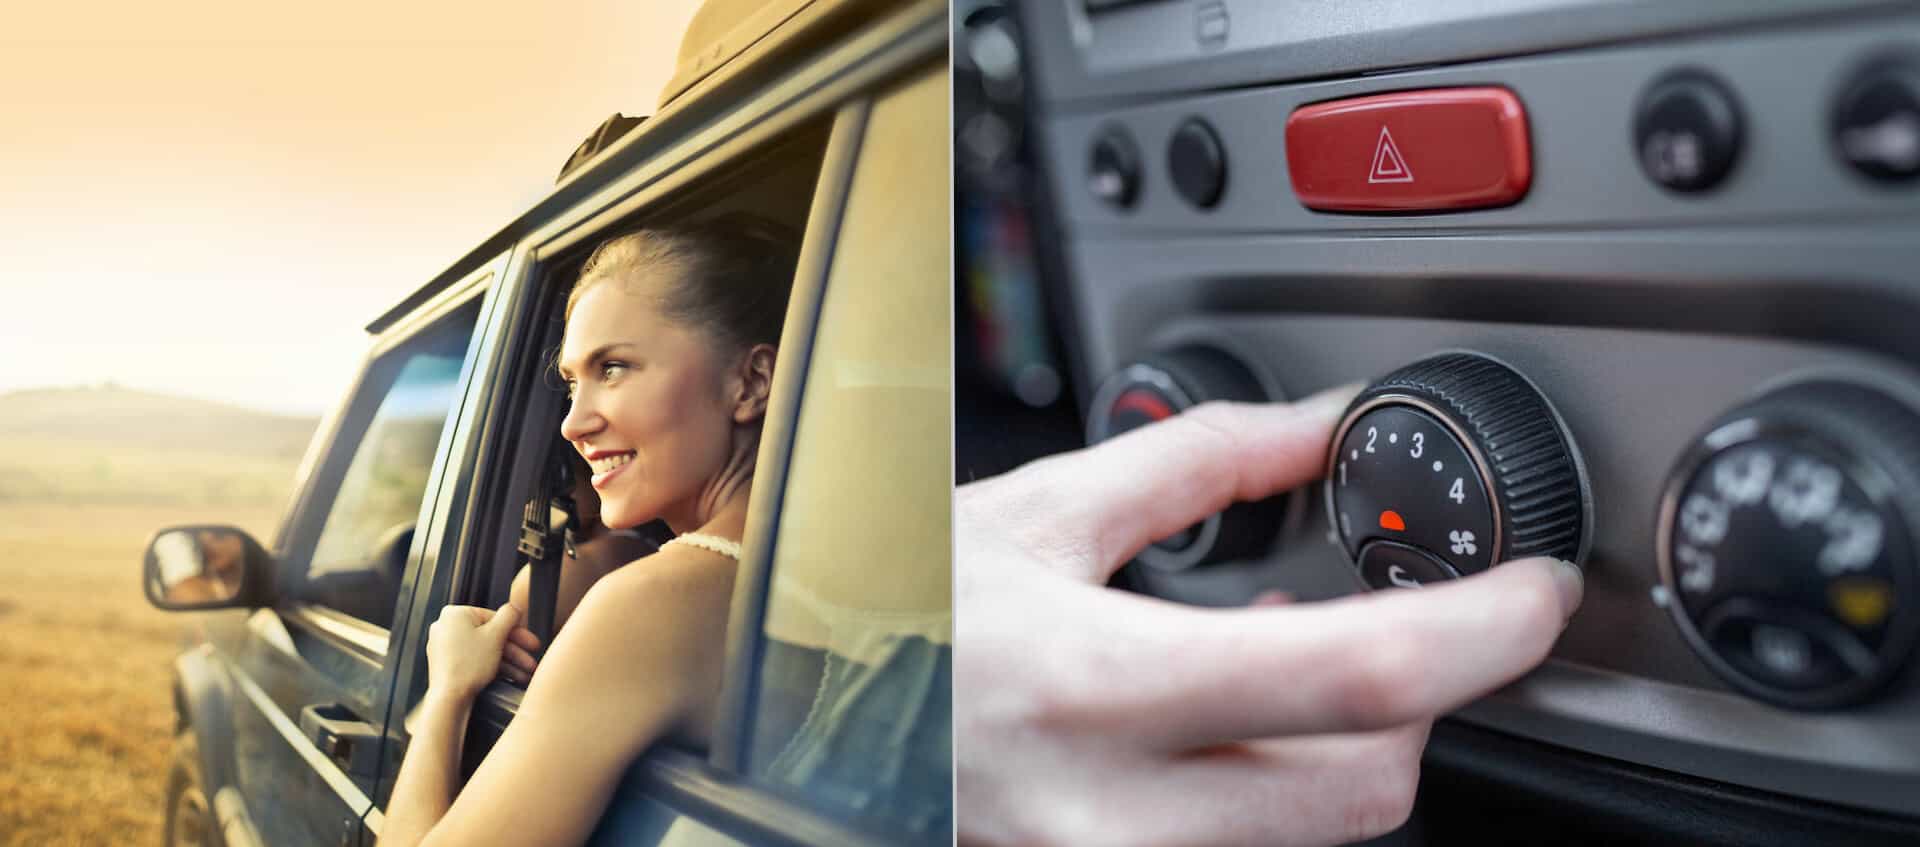 Rolling Down Windows vs. Air Conditioning: Which is More Fuel-Efficient?